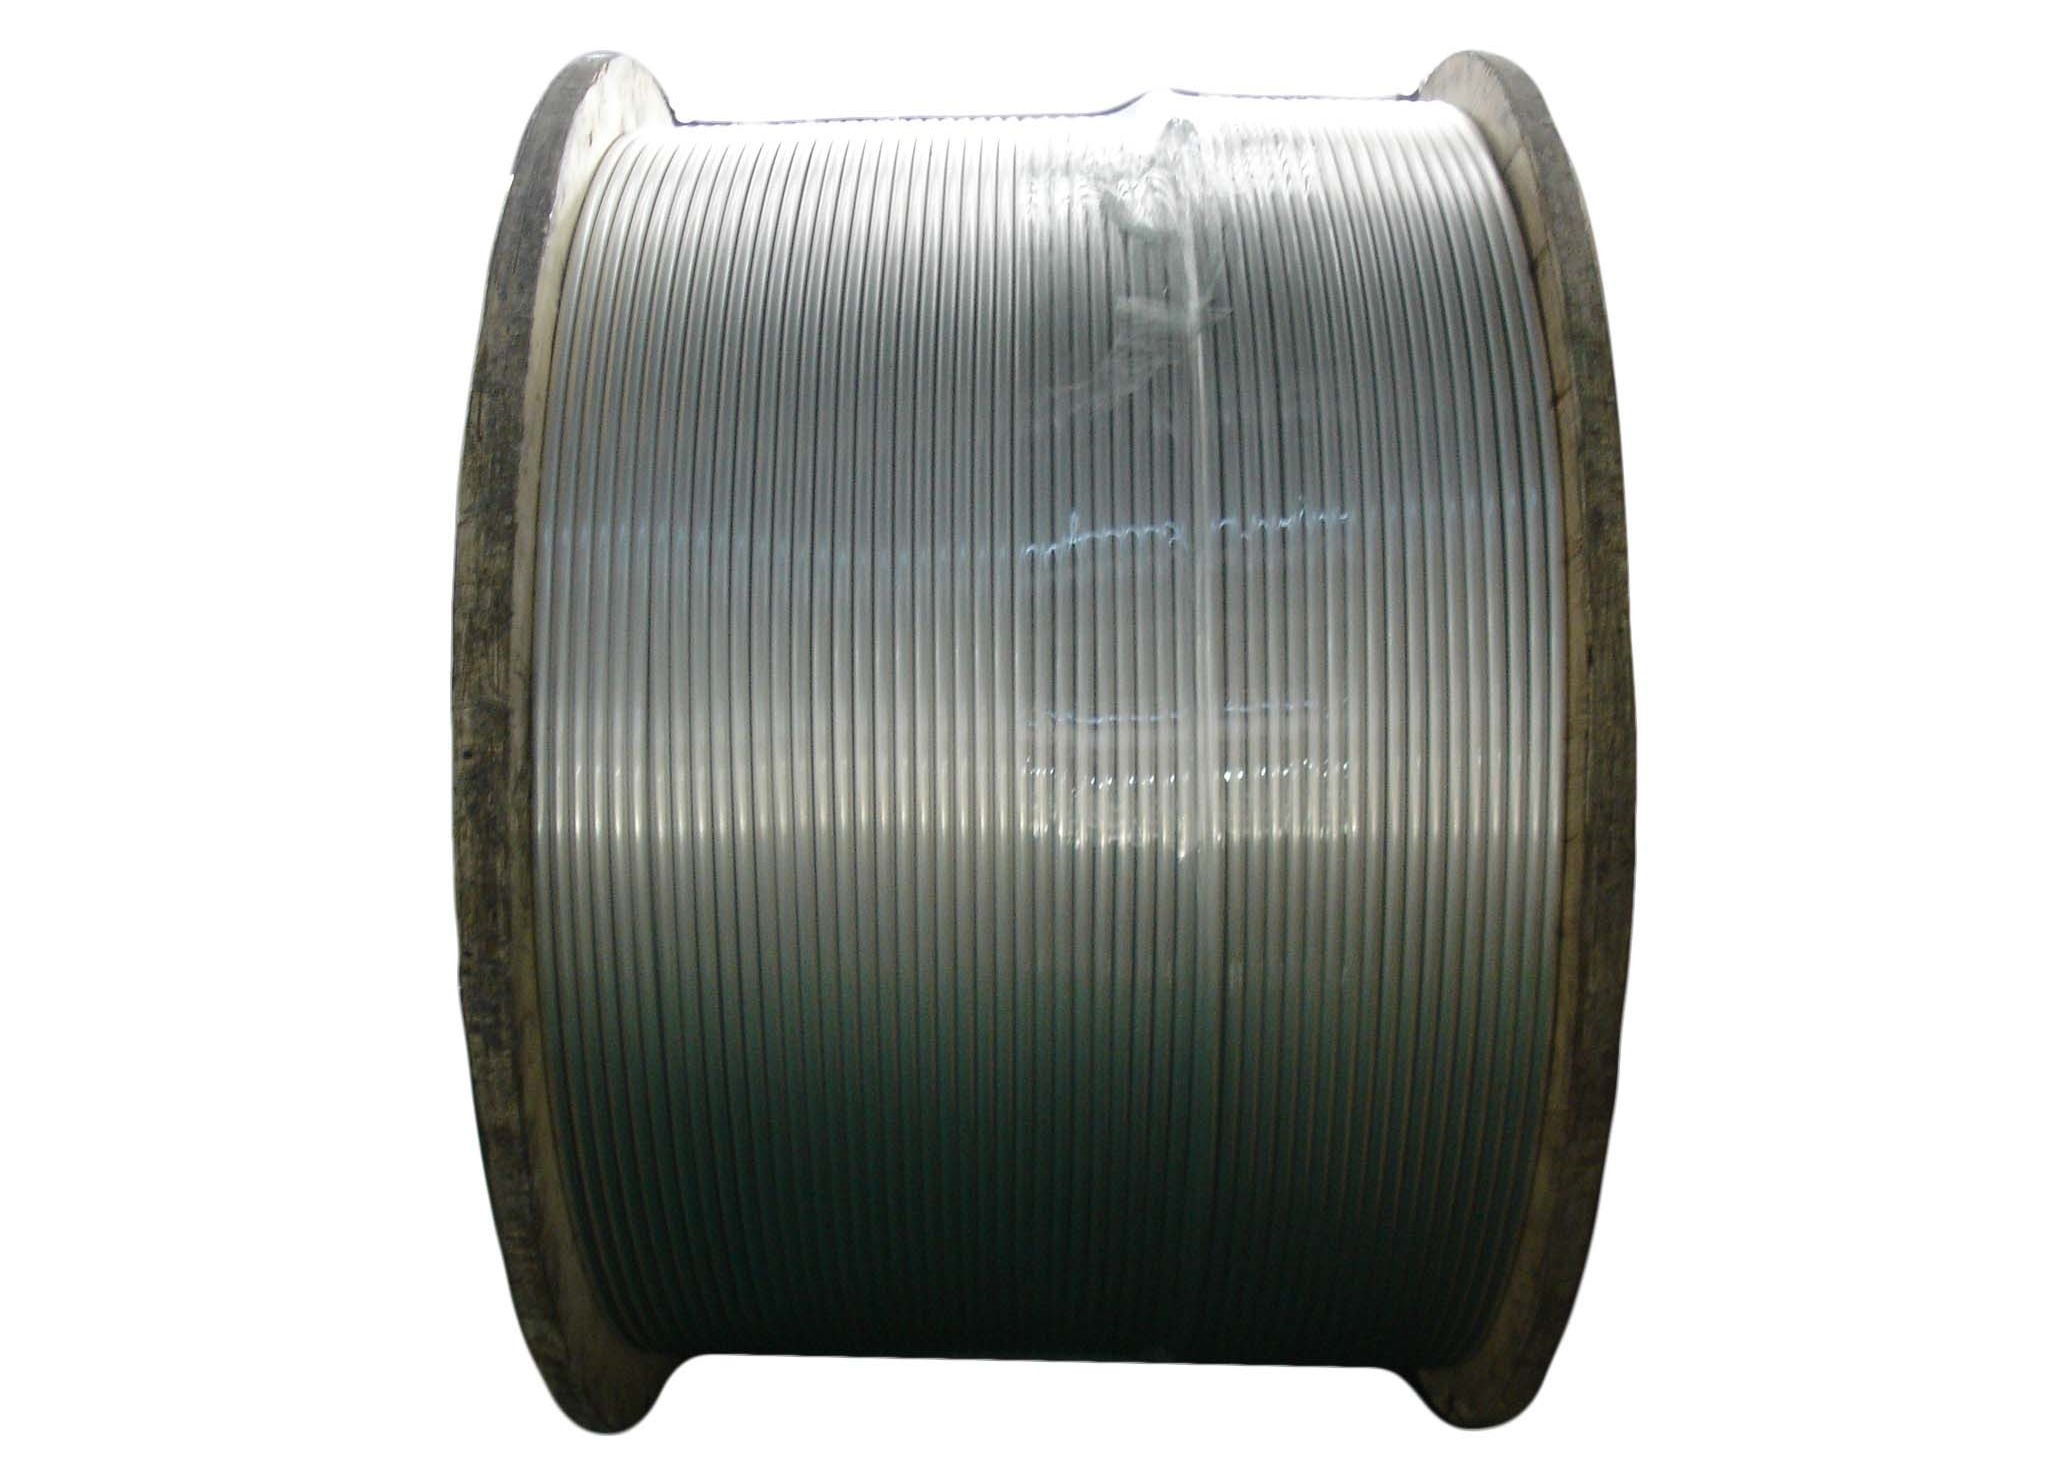  Seamless Aluminum Tube Trunk Cable 412JCA Distribution  Cable For CATV Networks Manufactures